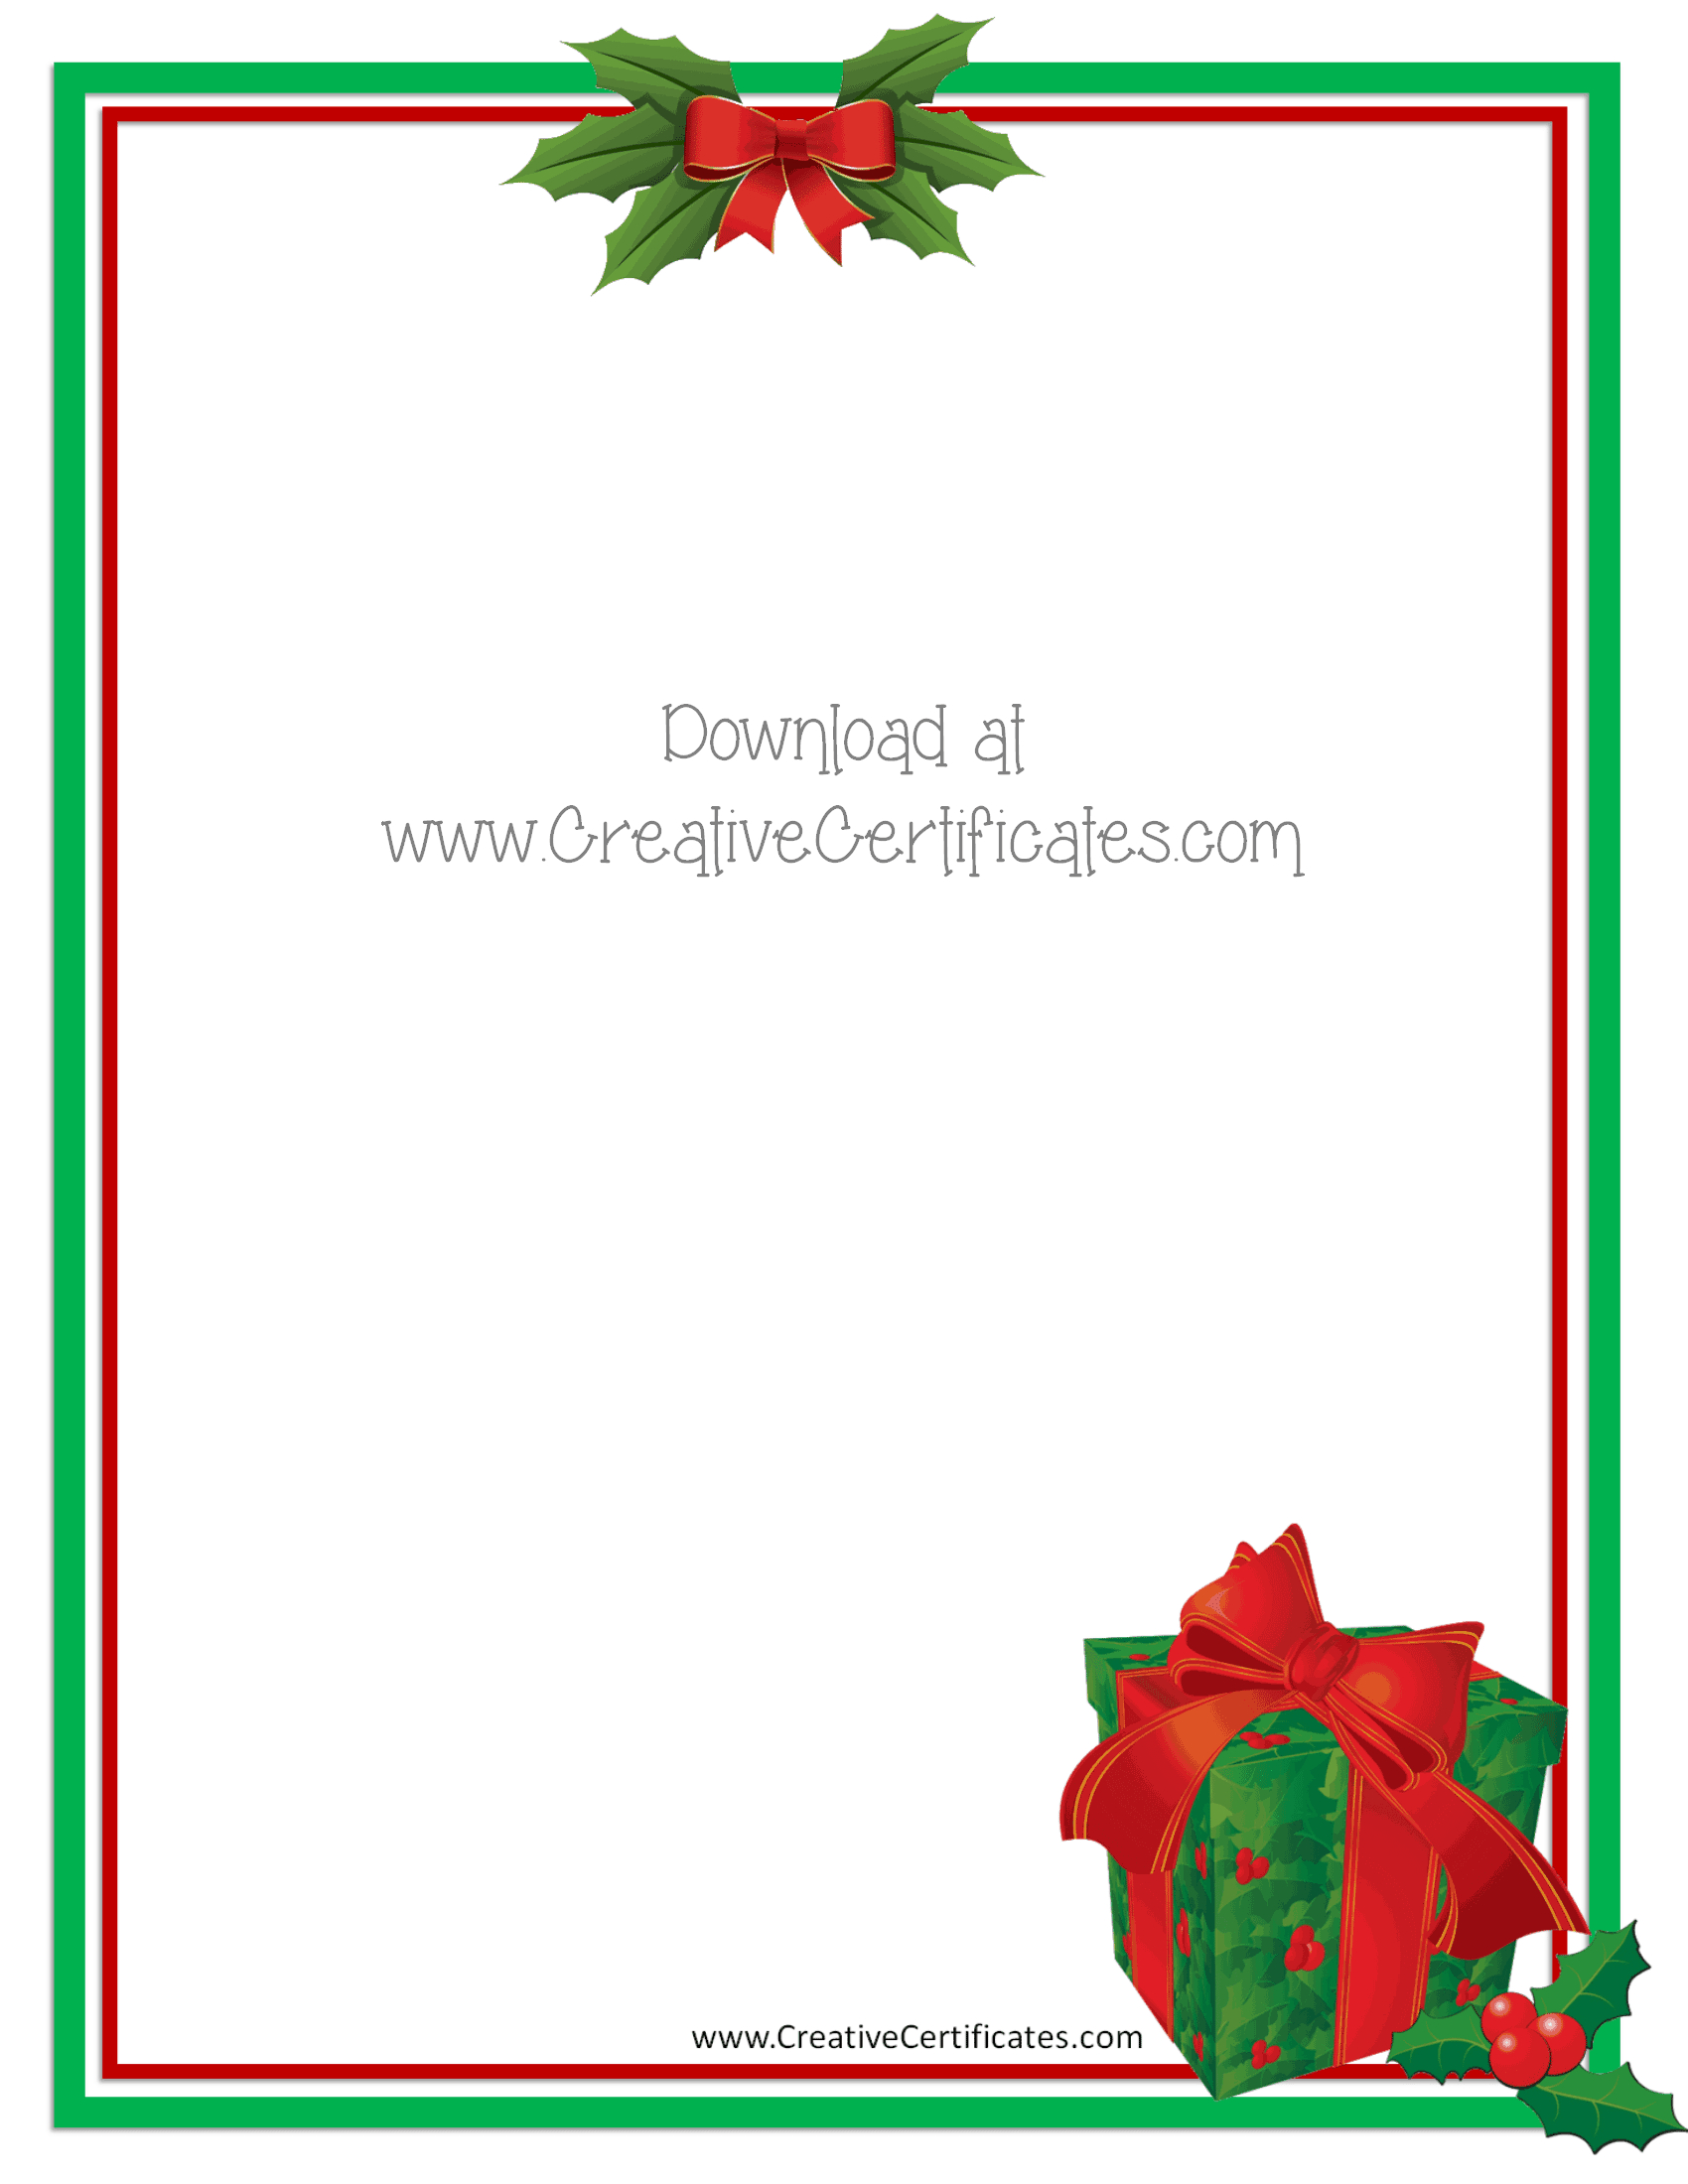 Free Christmas Border Templates - Customize Online Then Download - Free Printable Christmas Frames And Borders